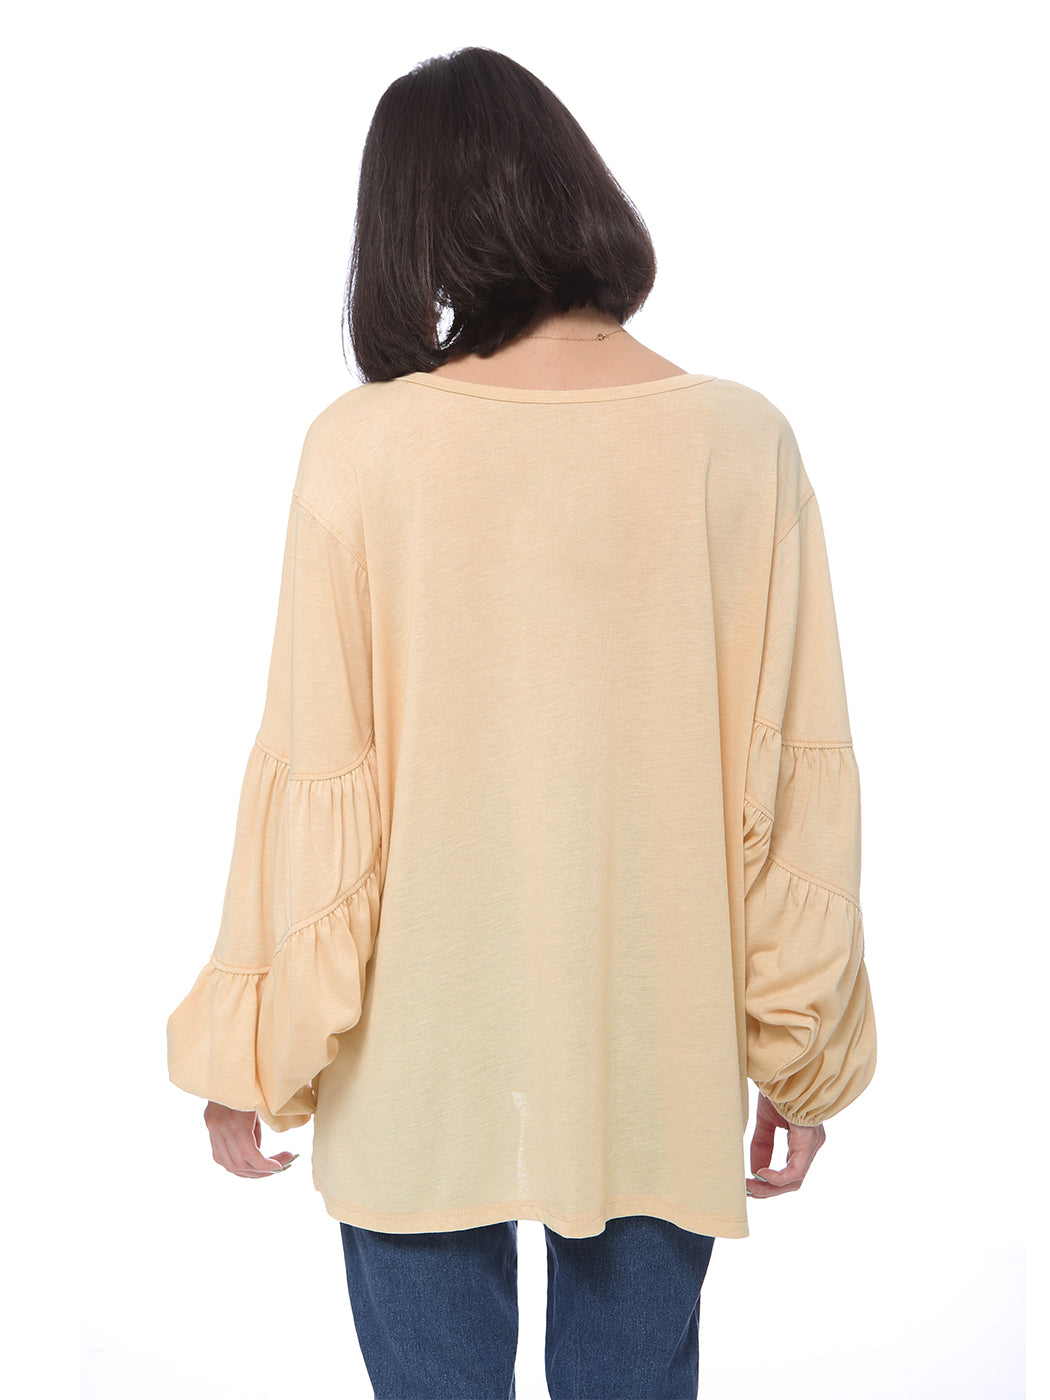 Casual & Comfy Long-Sleeve Blouse